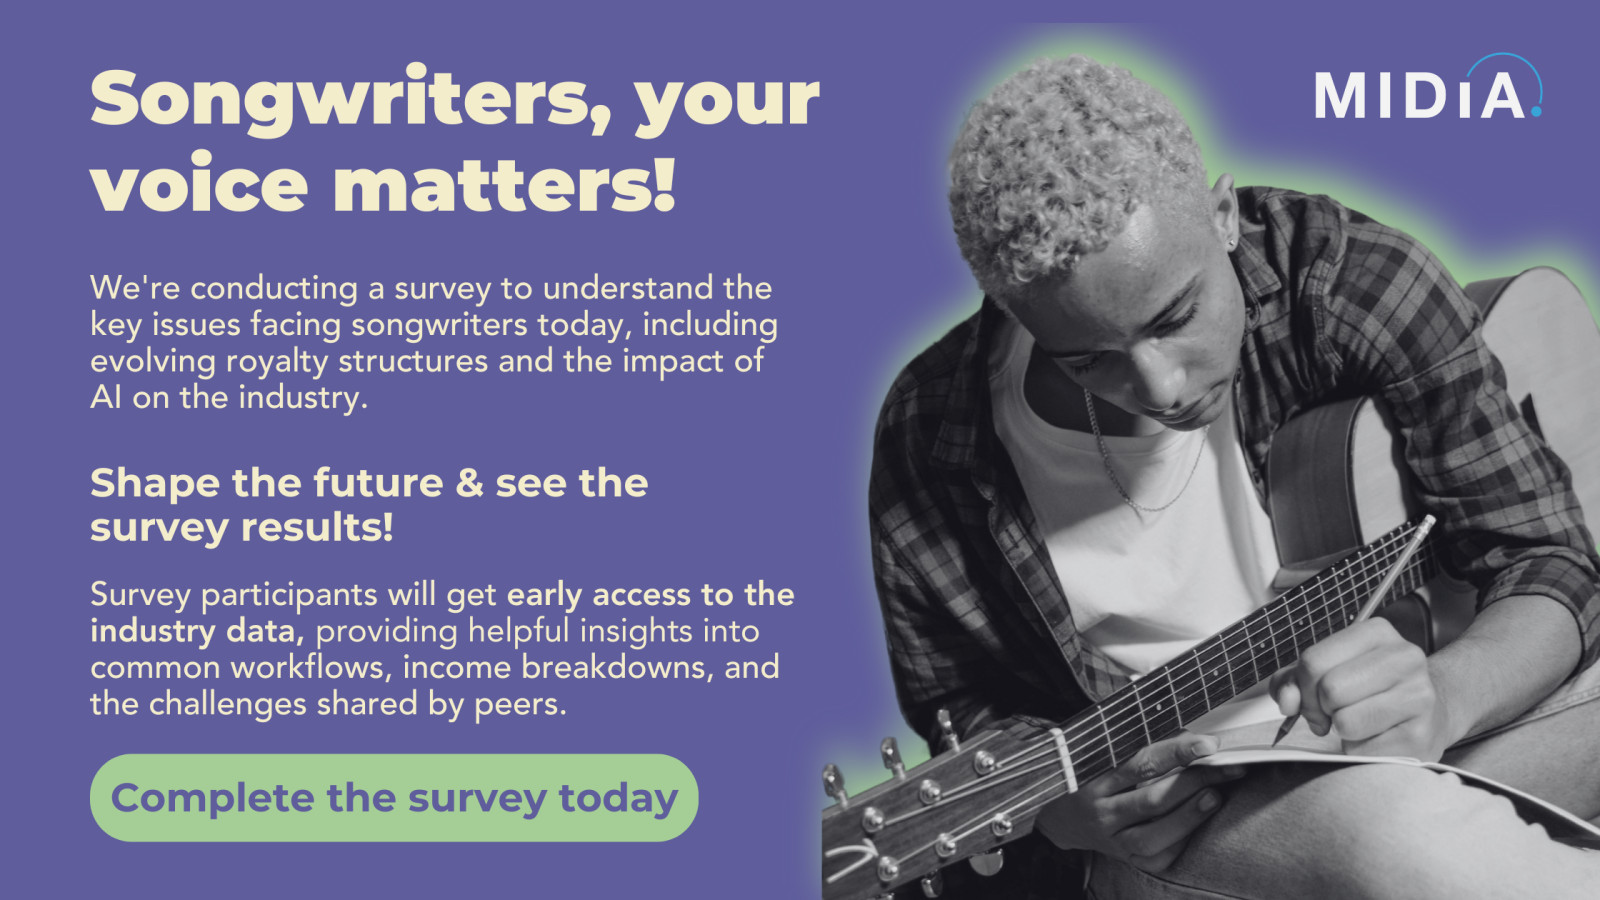 Songwriters’ opinions needed to shape the industry